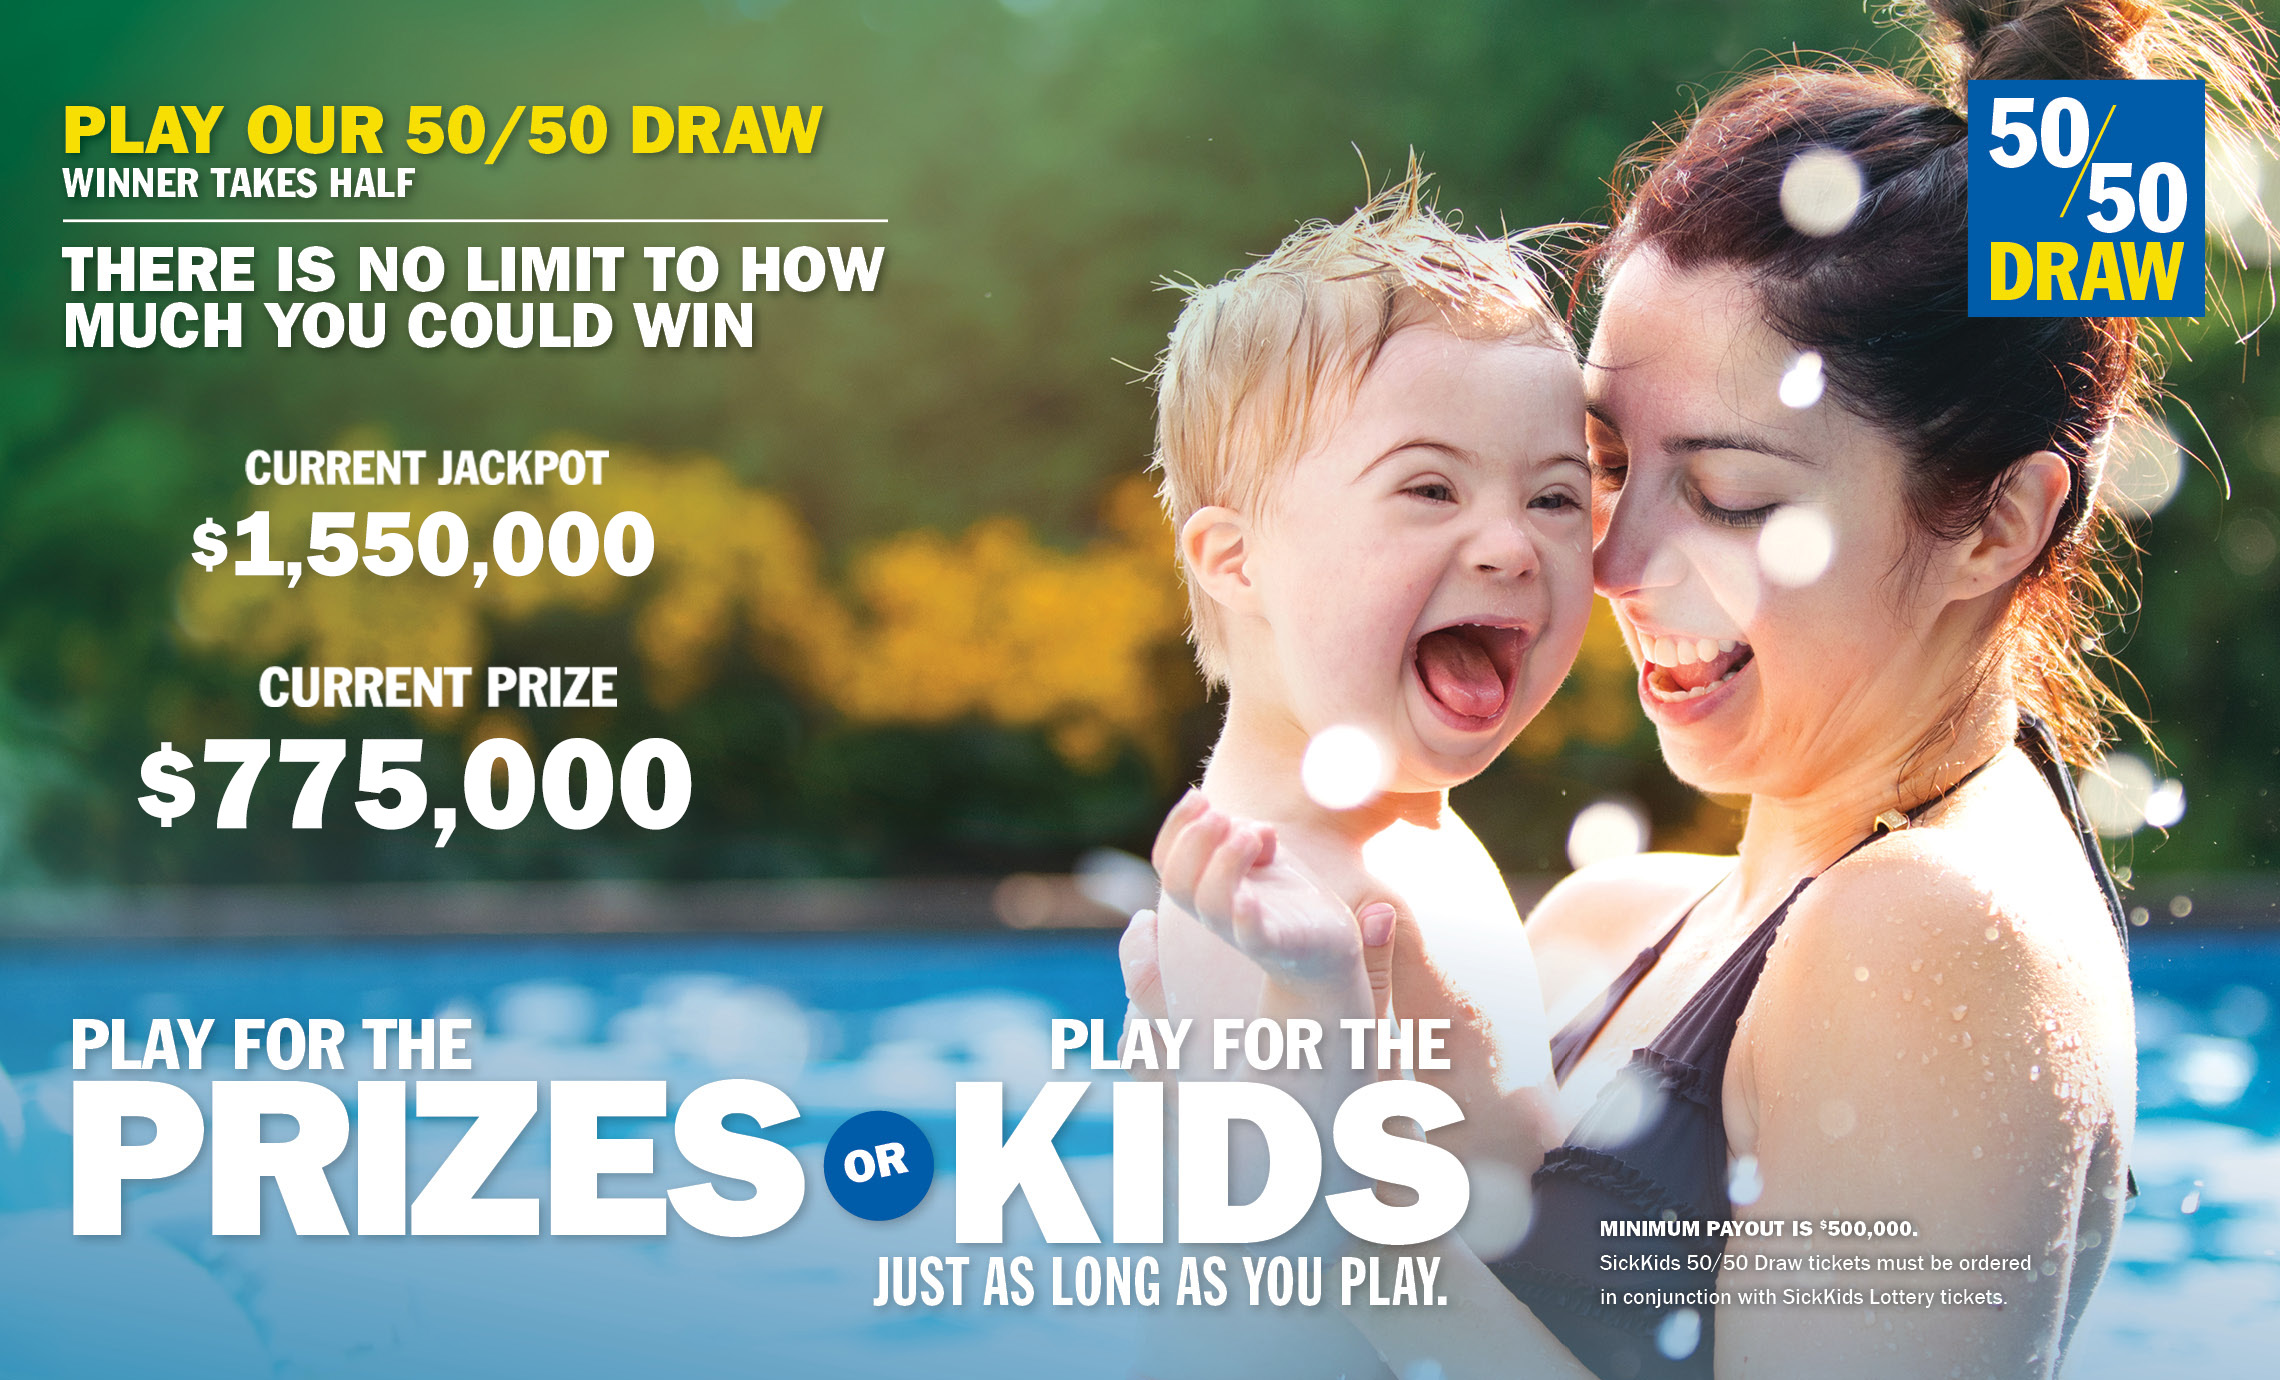 PLAY OUR 50/50 DRAW - THERE IS NO LIMIT TO HOW MUCH YOU COULD WIN